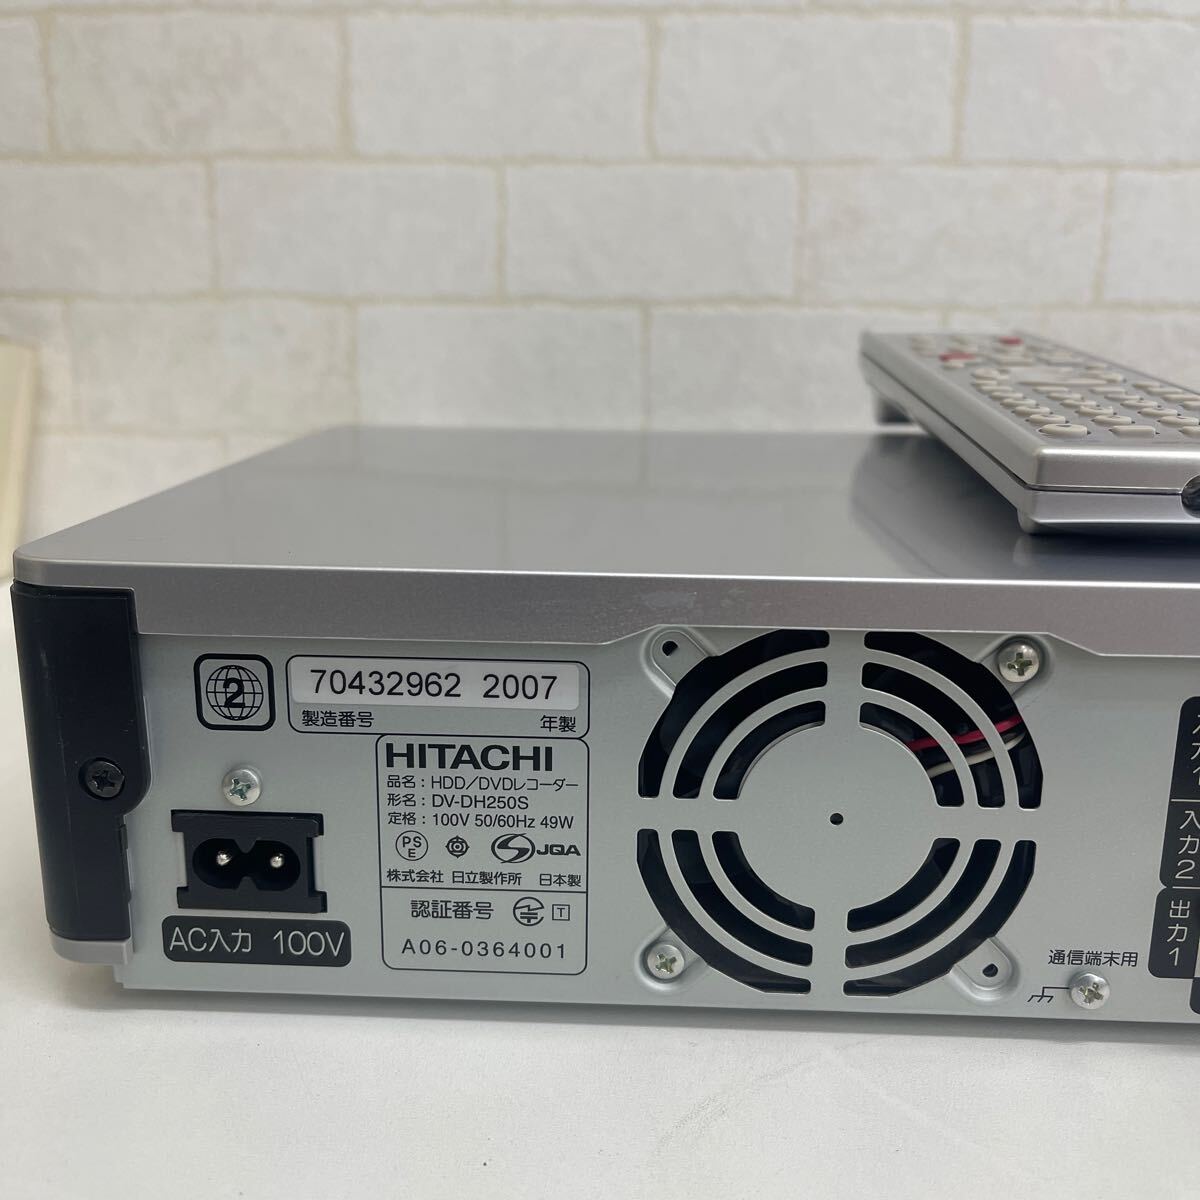 Y318. 36. HITACHI DV-DH250S Hitachi DVD/HDD recorder 2007 year made simple operation check settled. remote control power supply HDMI unused attaching beautiful goods 